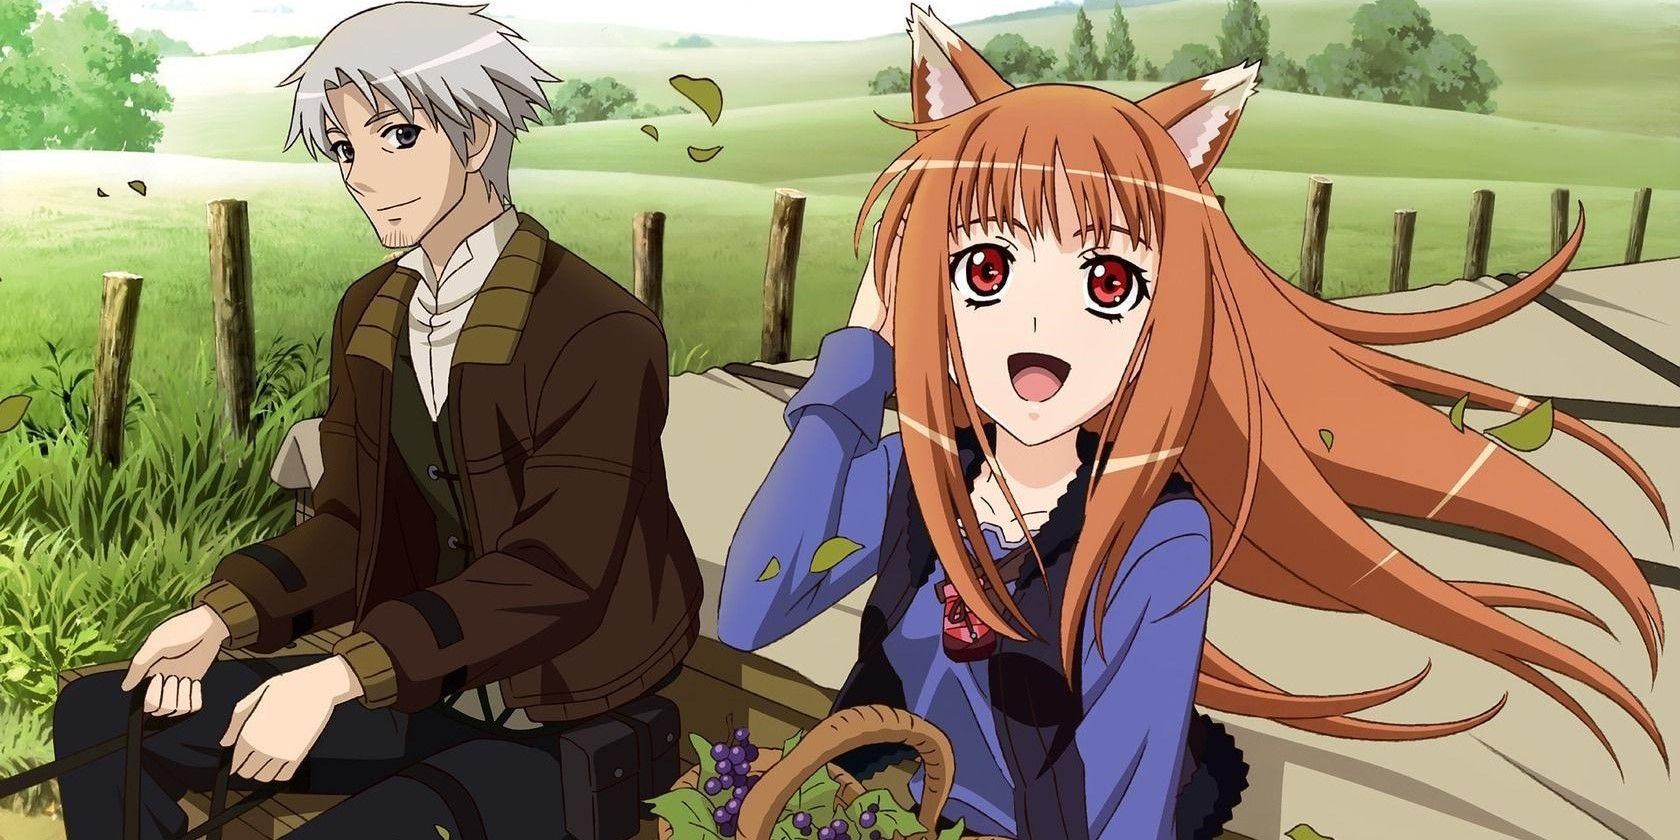 Lawrence and Holo from Spice and Wolf travel in their cart.